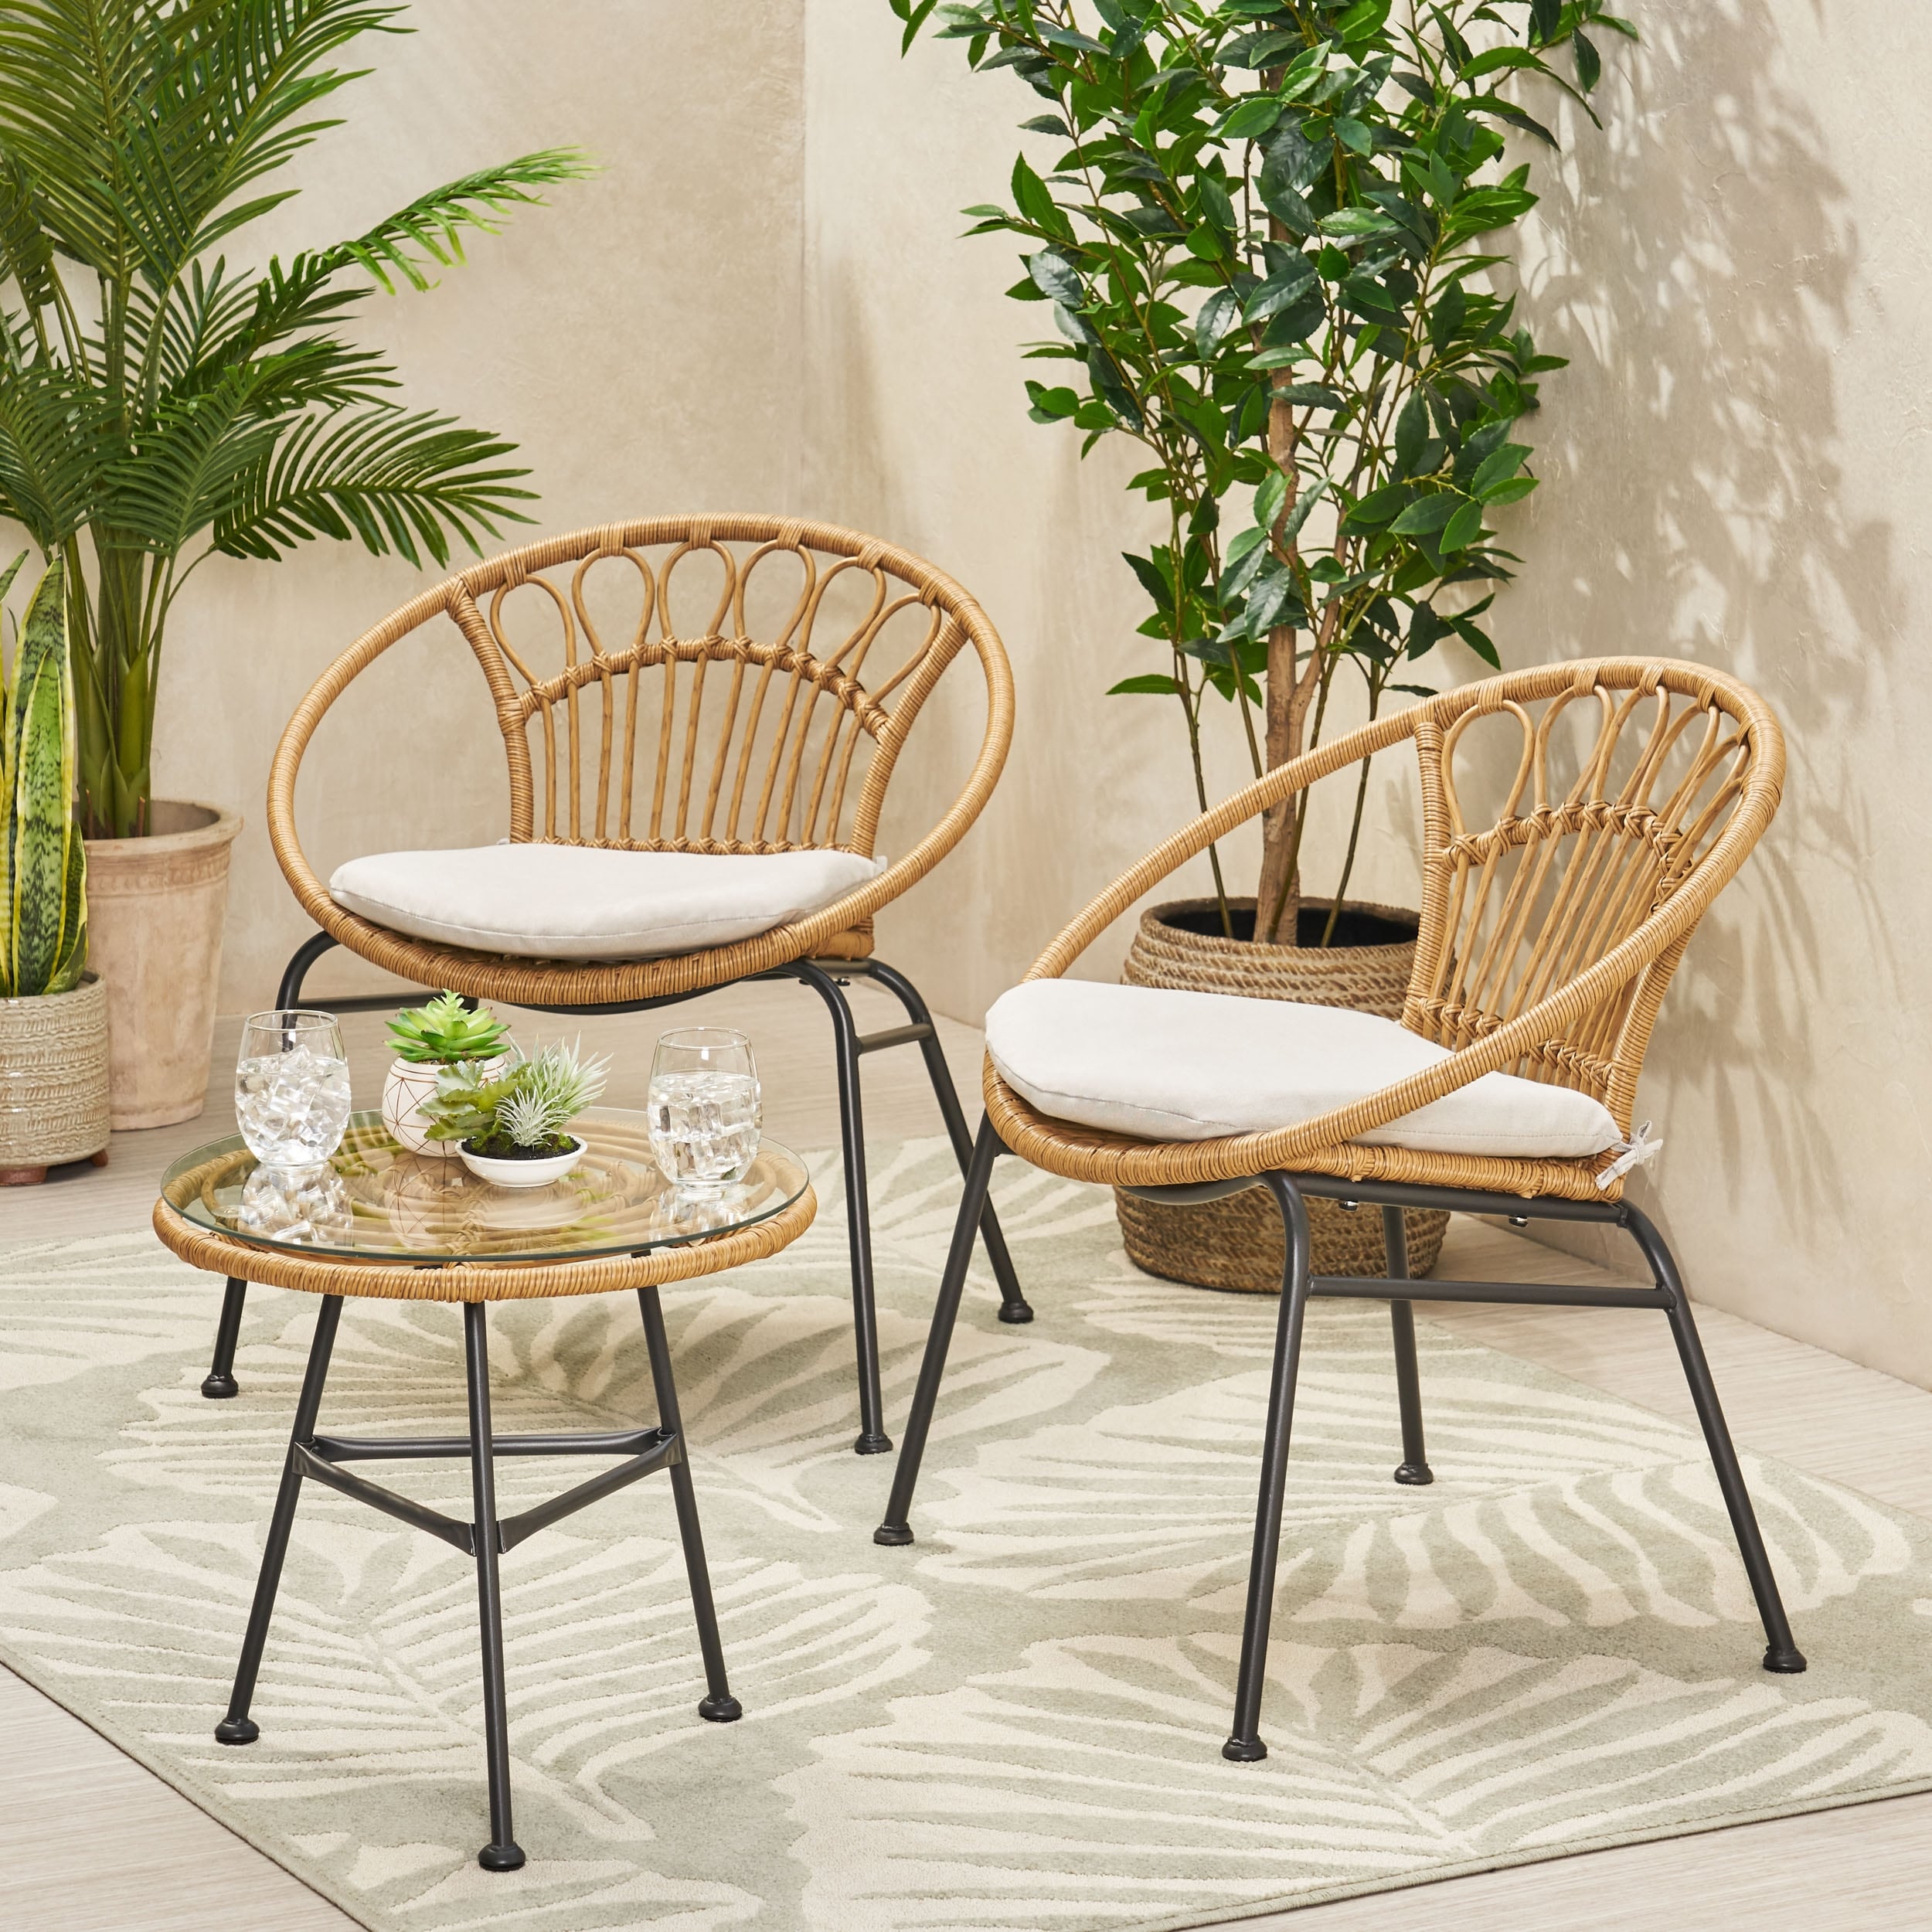 Banya Outdoor Faux Wicker Chat Set By Christopher Knight Home